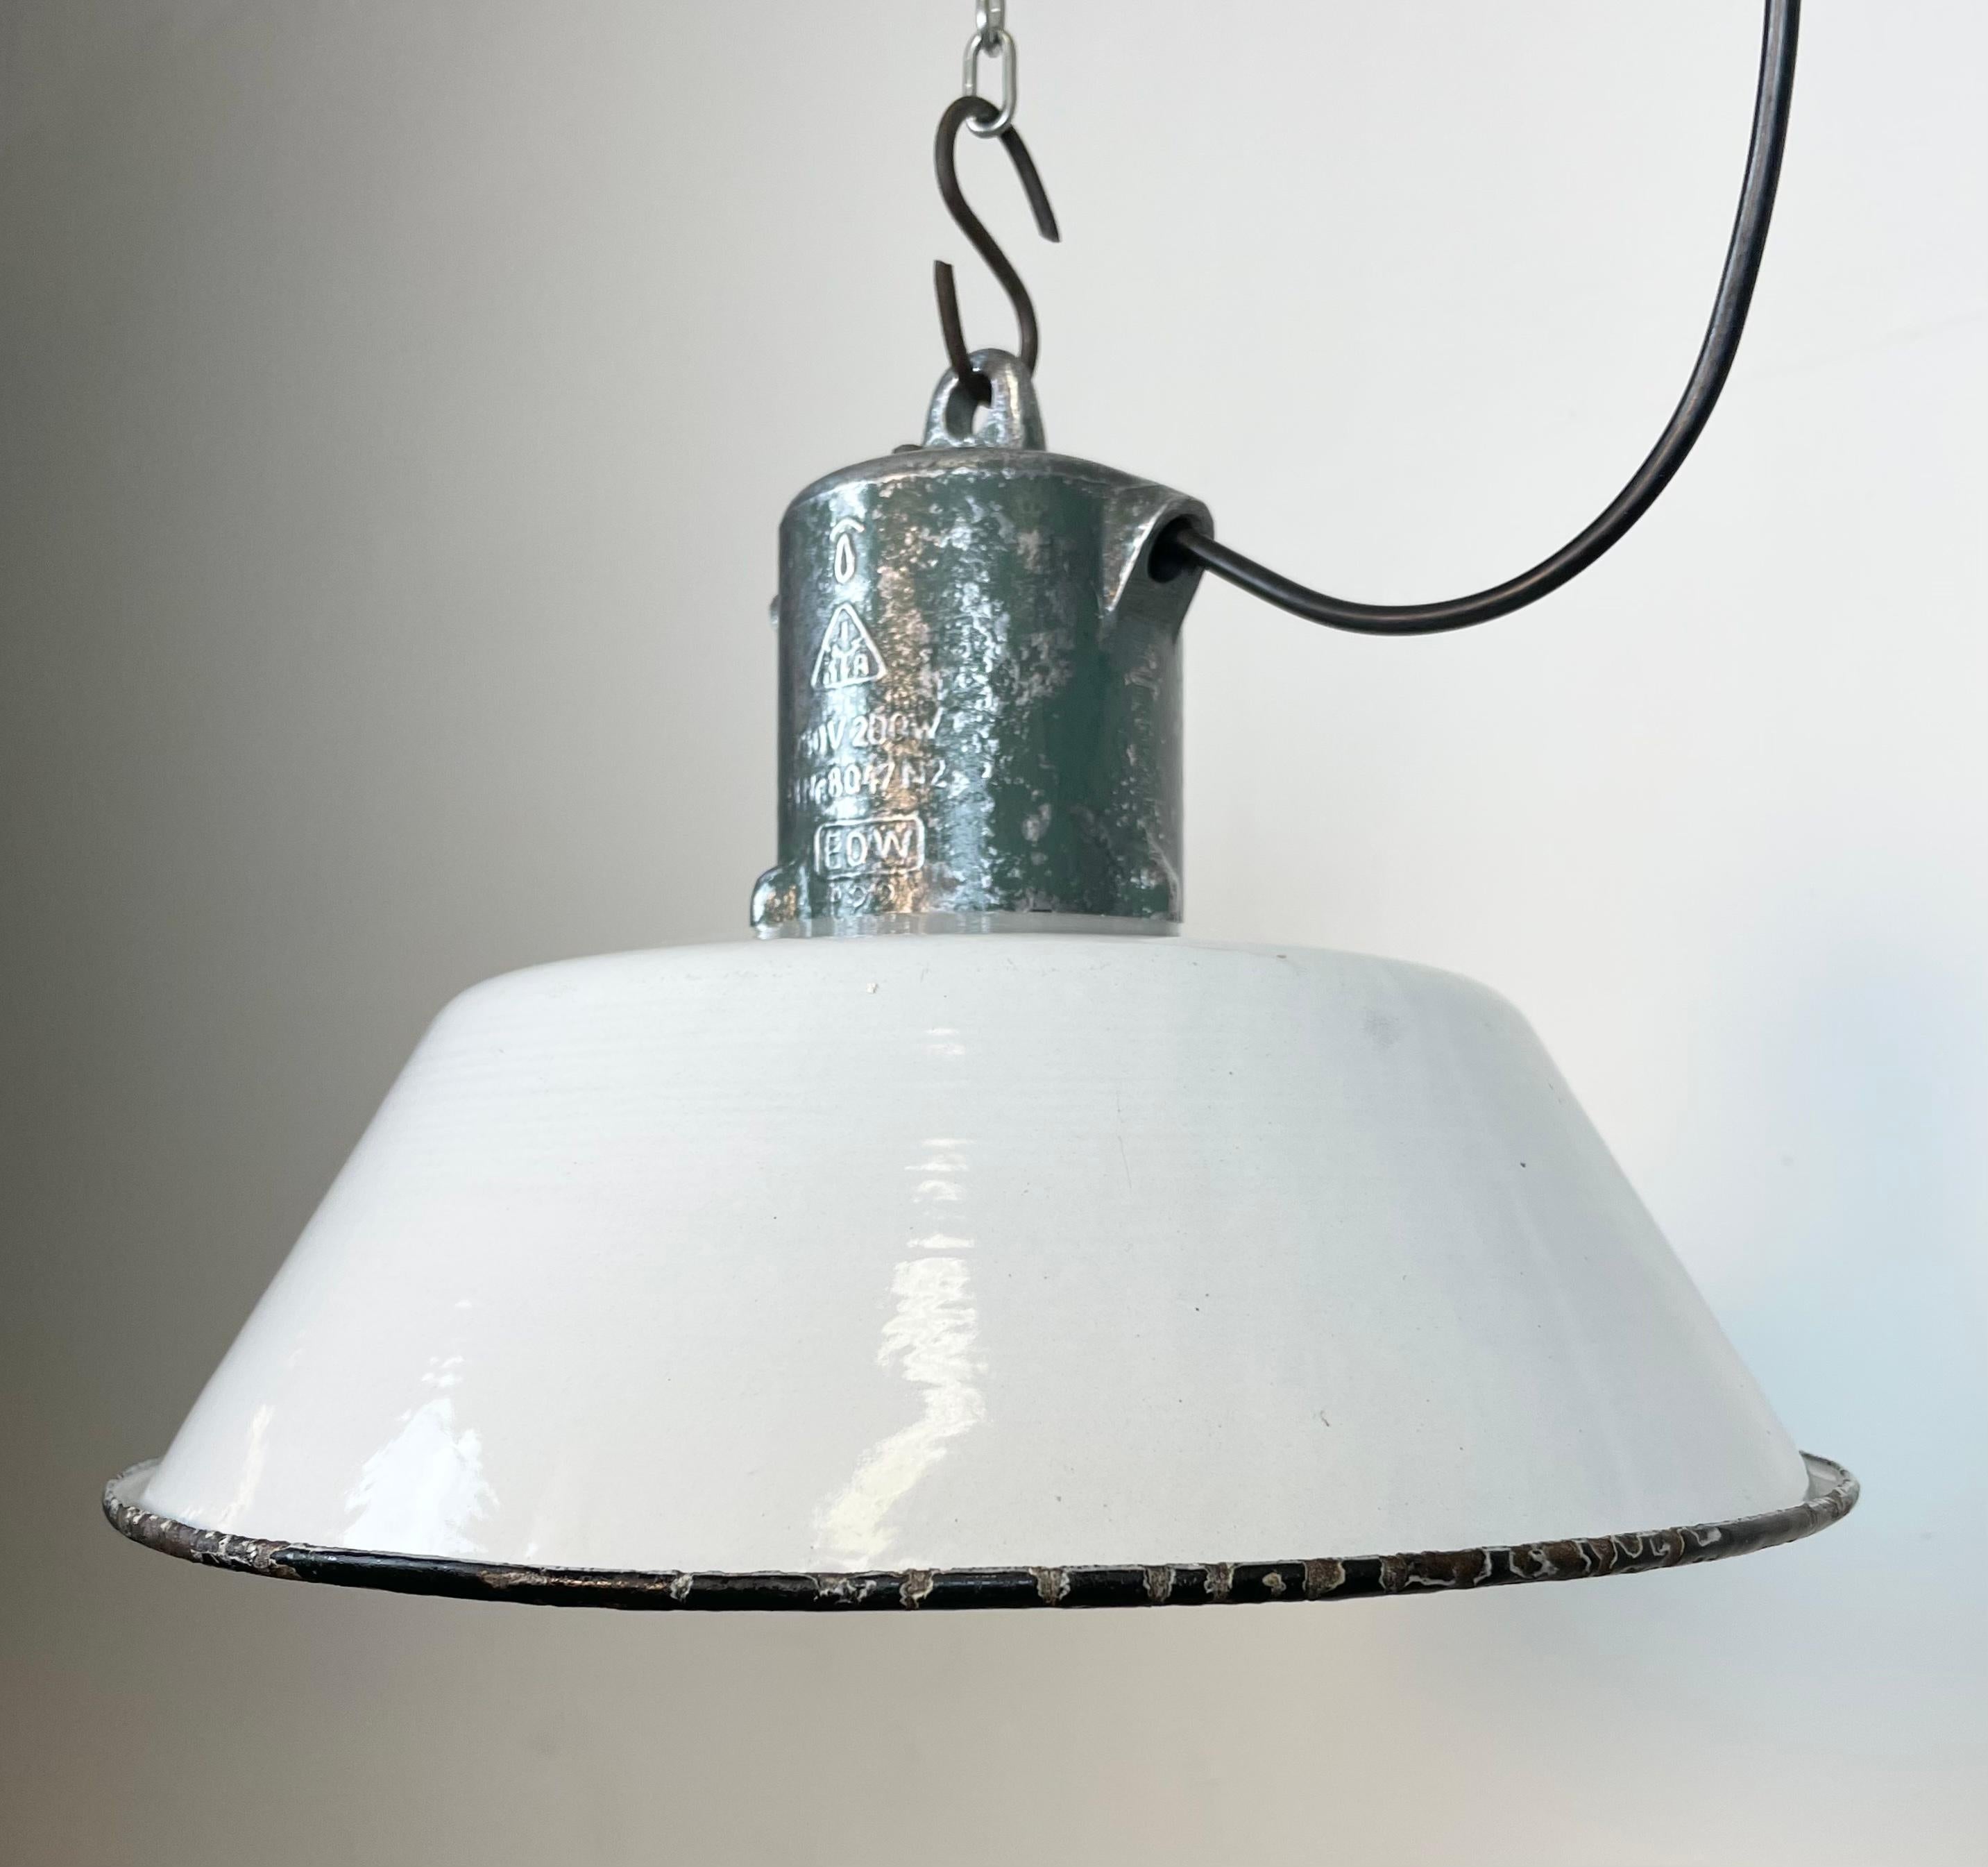 20th Century Industrial White Enamel Industrial Lamp with Cast Aluminium Top from EOW, 1950s For Sale